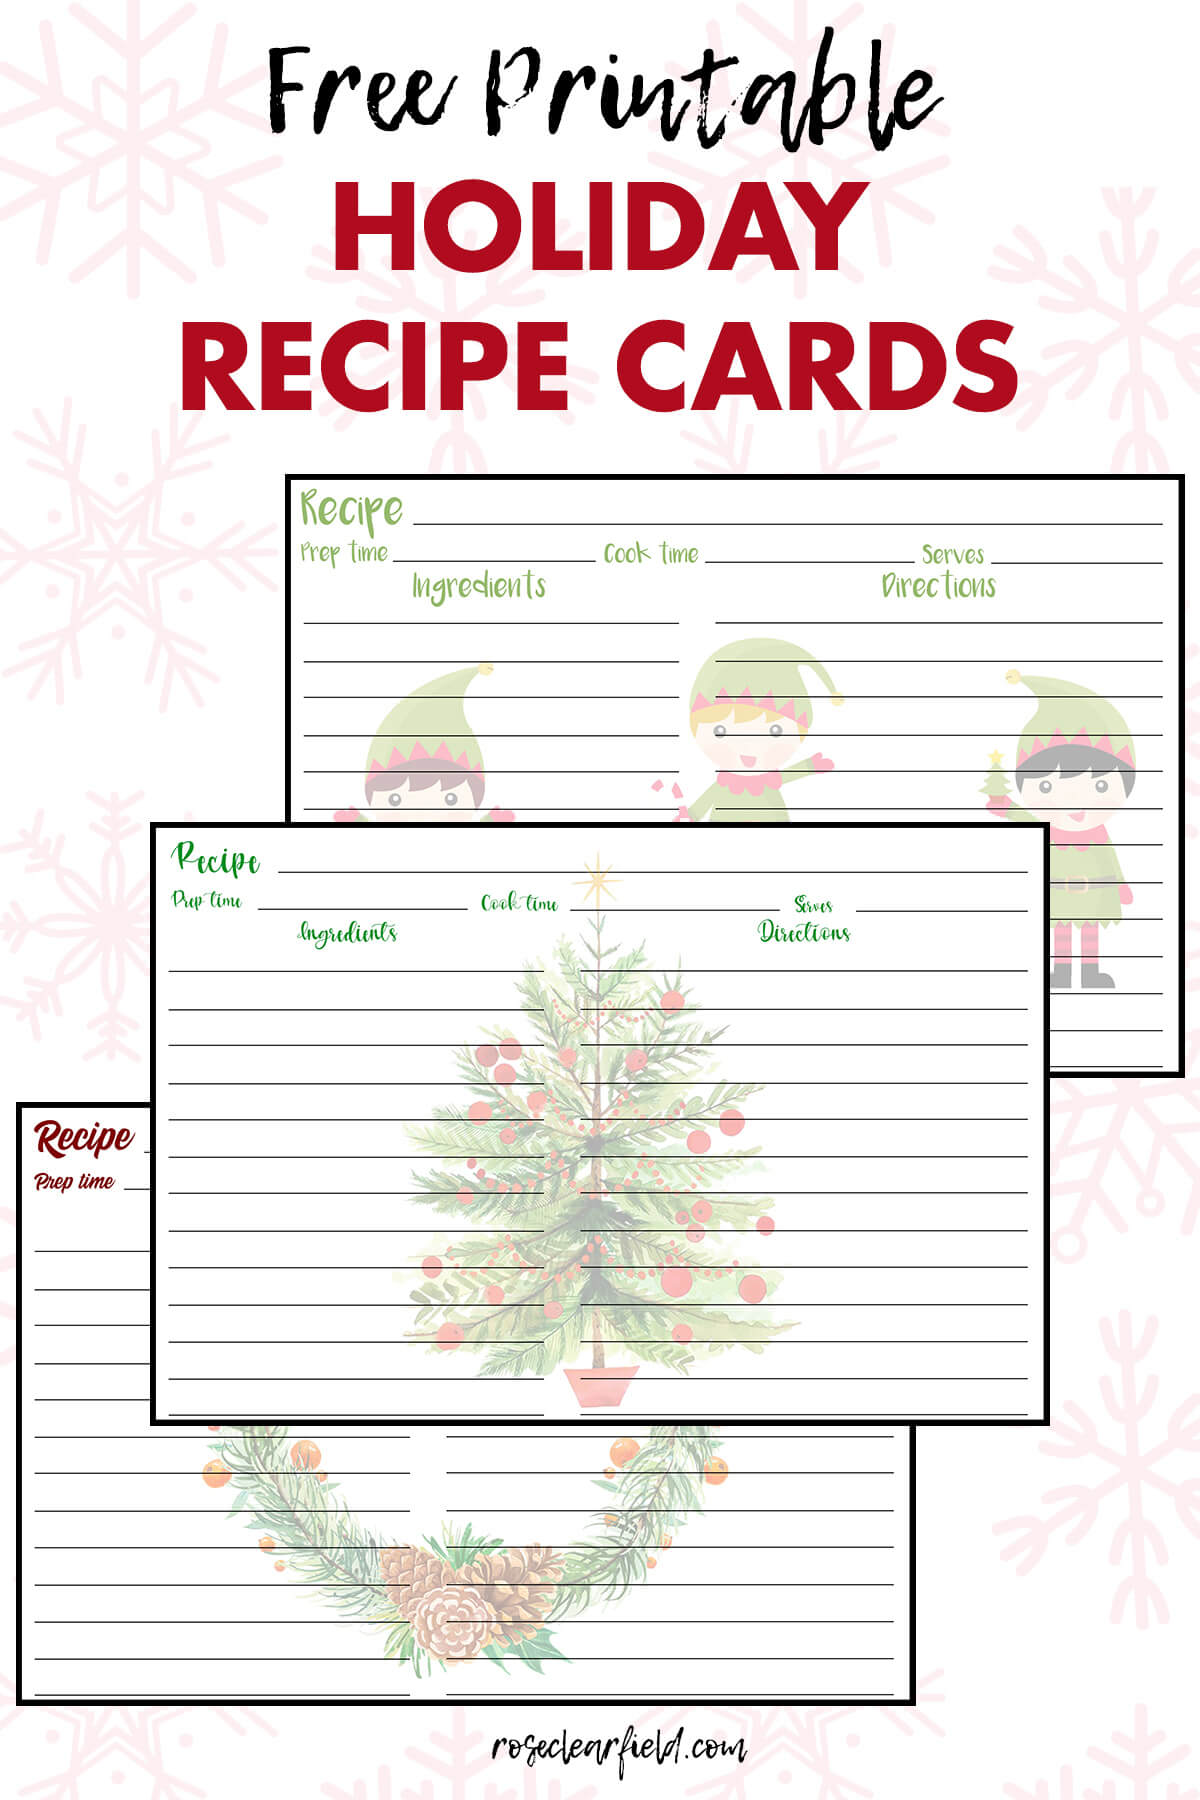 Free Printable Holiday Recipe Cards Rose Clearfield Throughout Cookie 